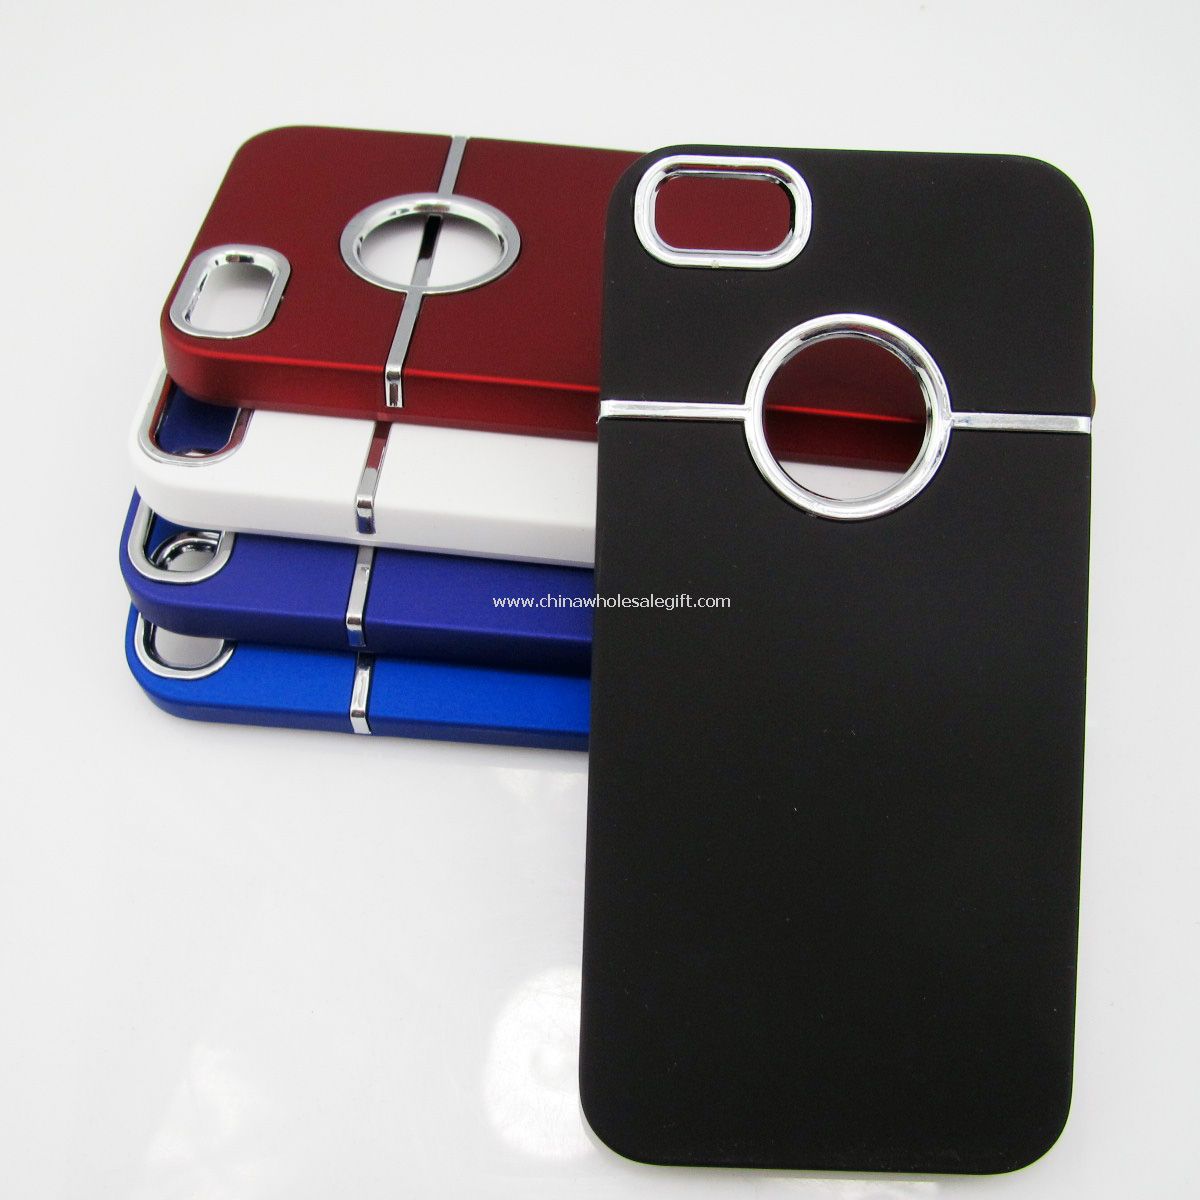 iPhone5 Deluxe chrome hard case